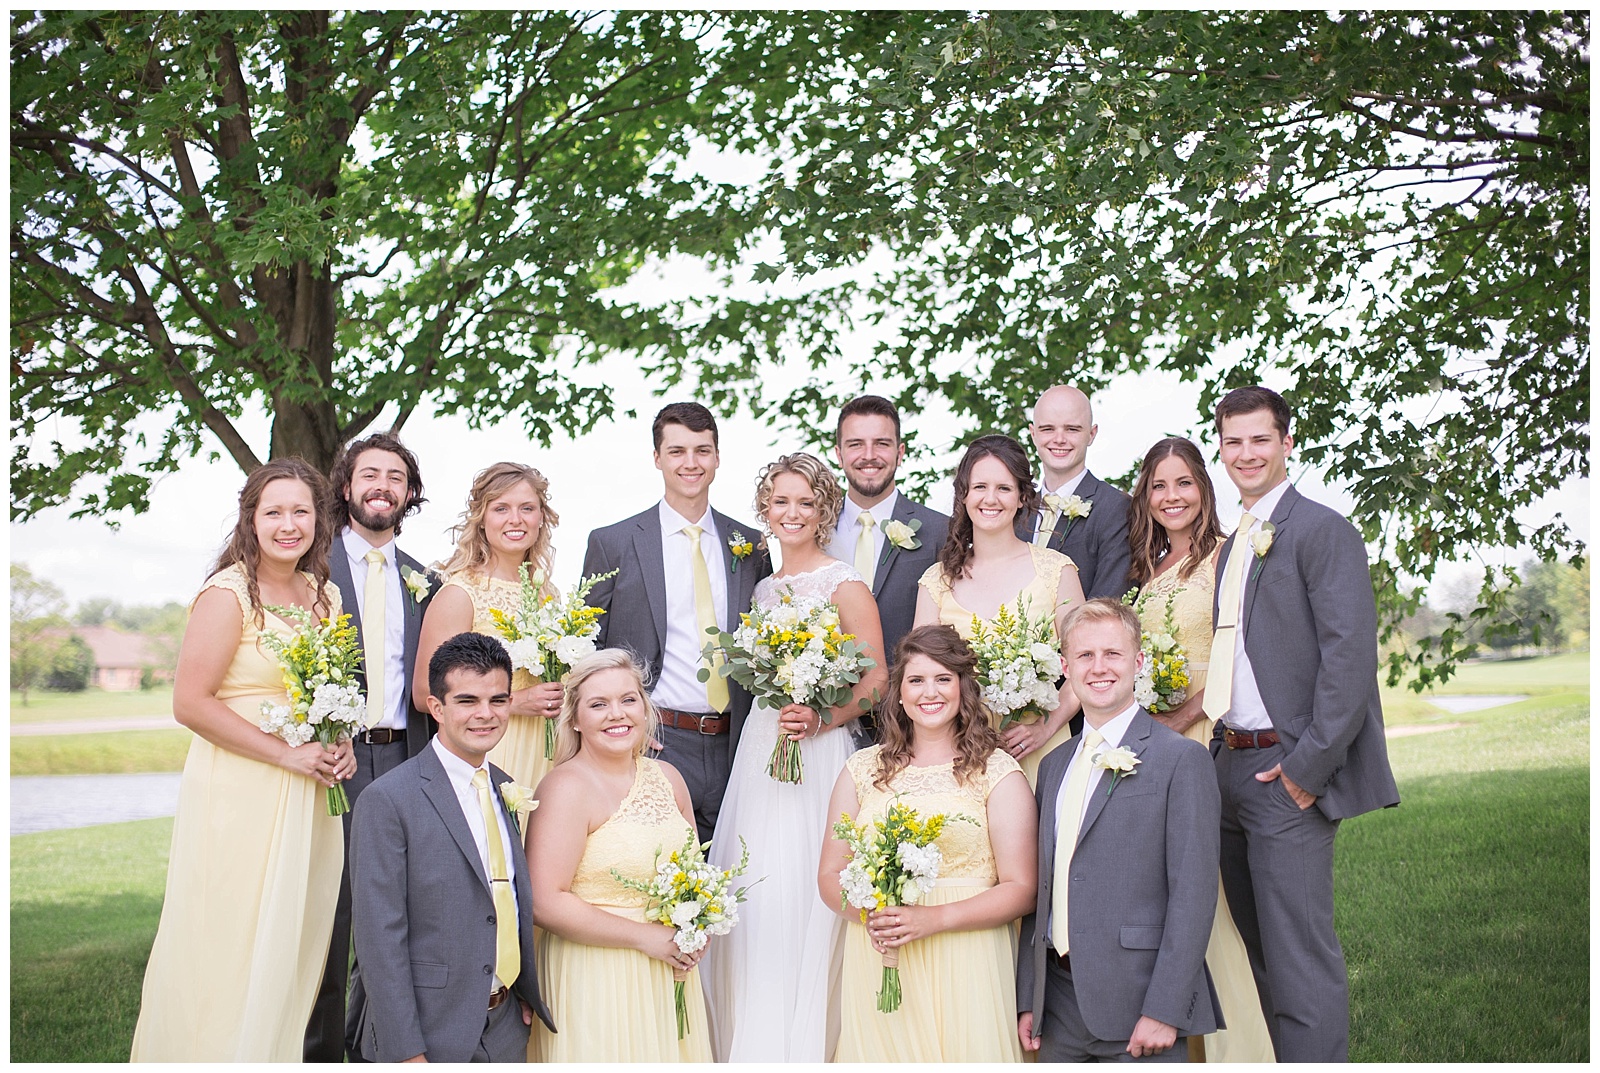 Golf Course Wedding - Midwest | Monica Brown Photography | monicabrownphoto.com